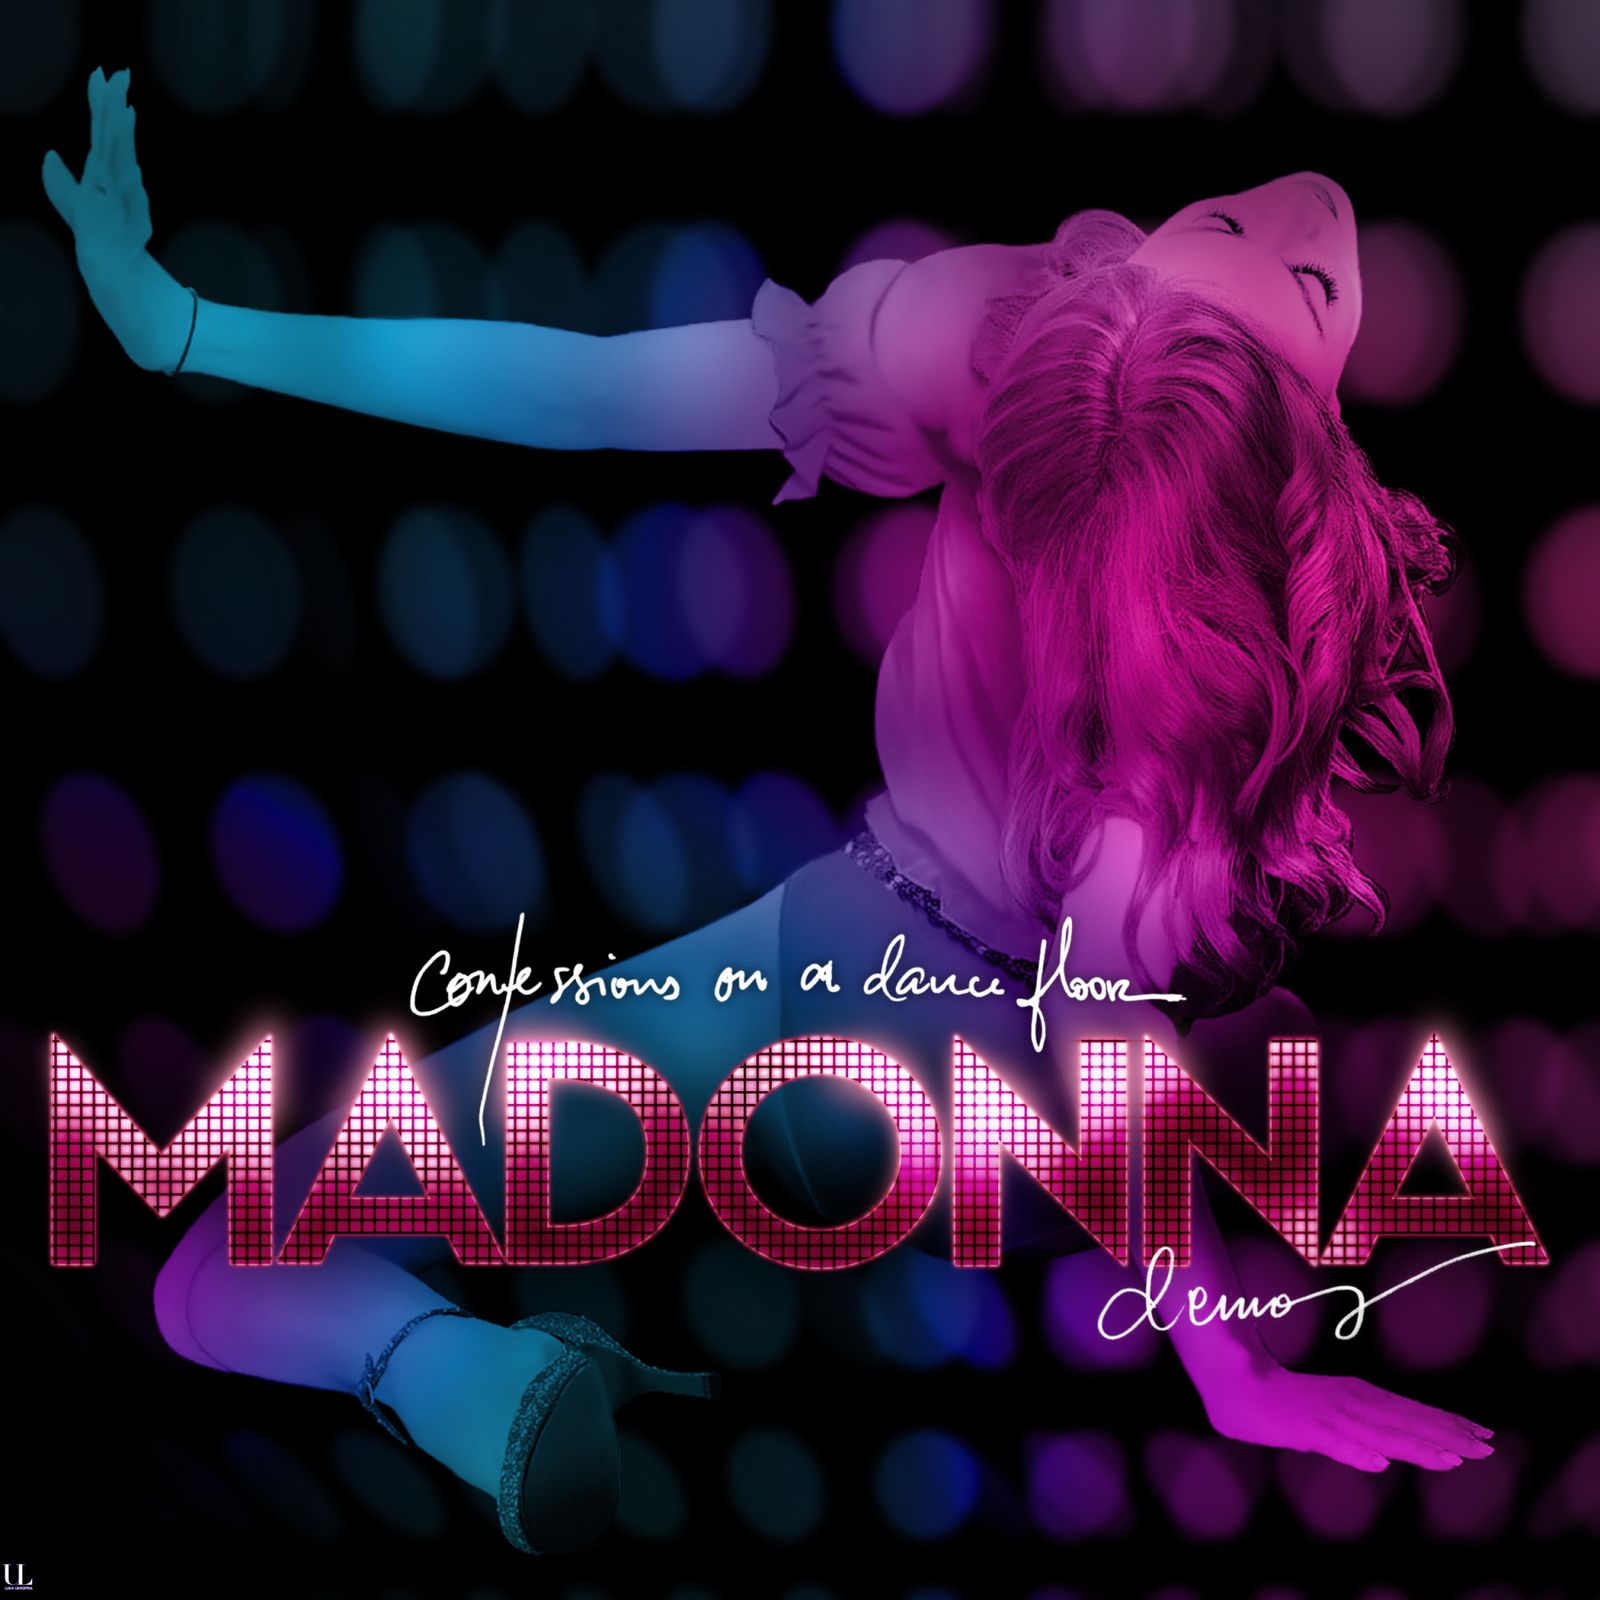 Confessions on a Dance Floor - Madonnaunderground